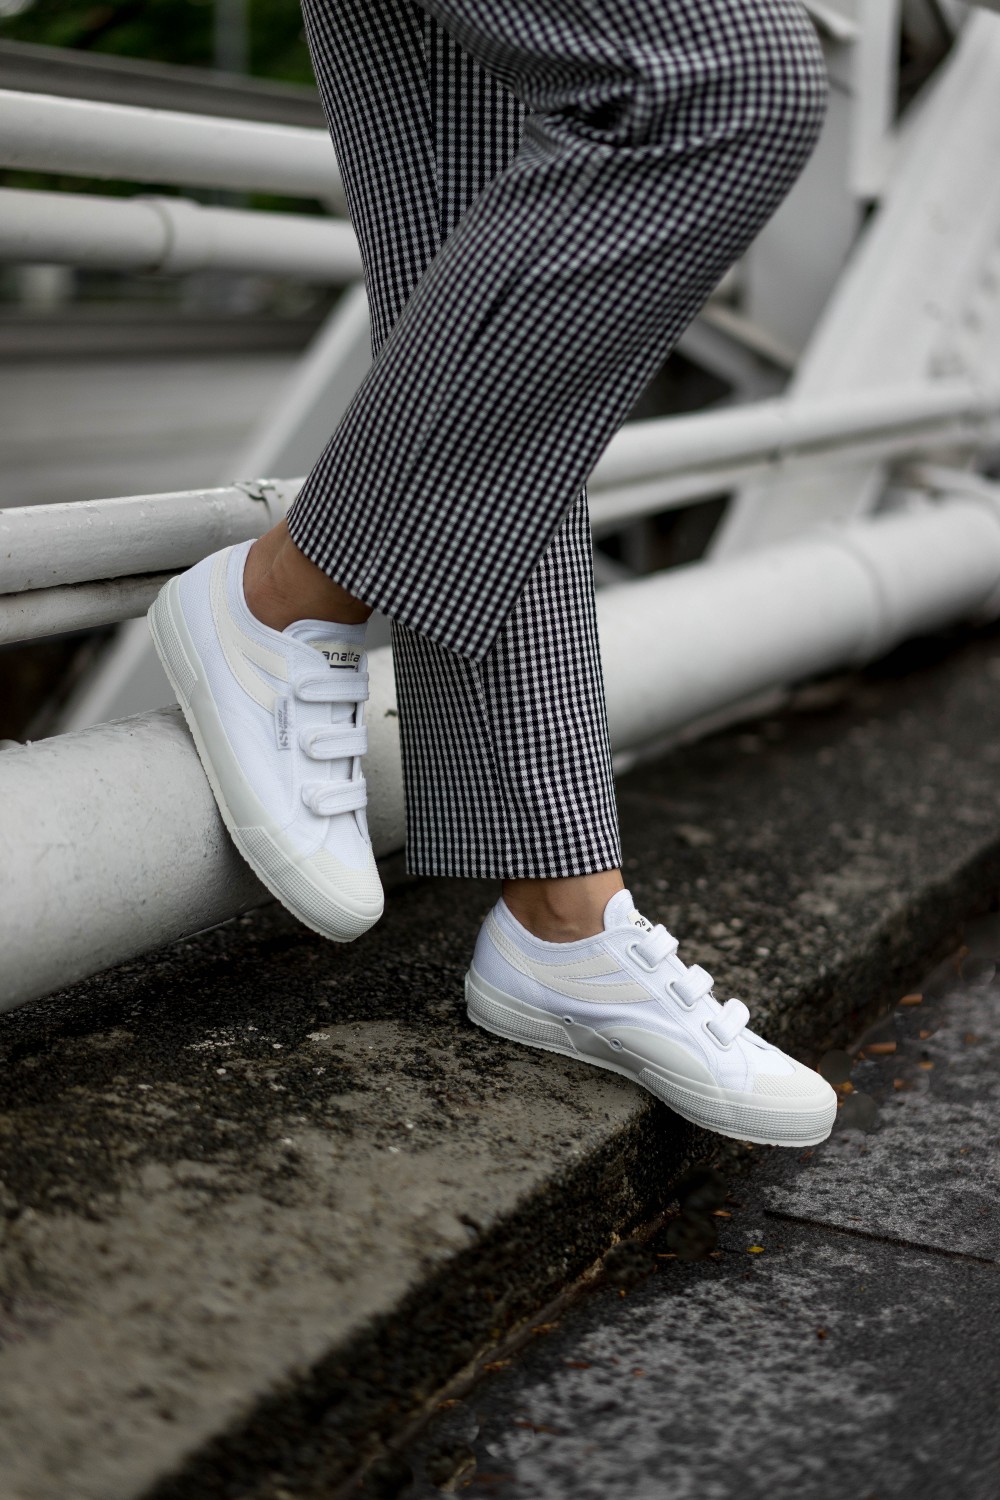 You can get Superga sneakers at up to 70% off in their 4-day flash sale from 14 – 17 Mar 2019 - 1